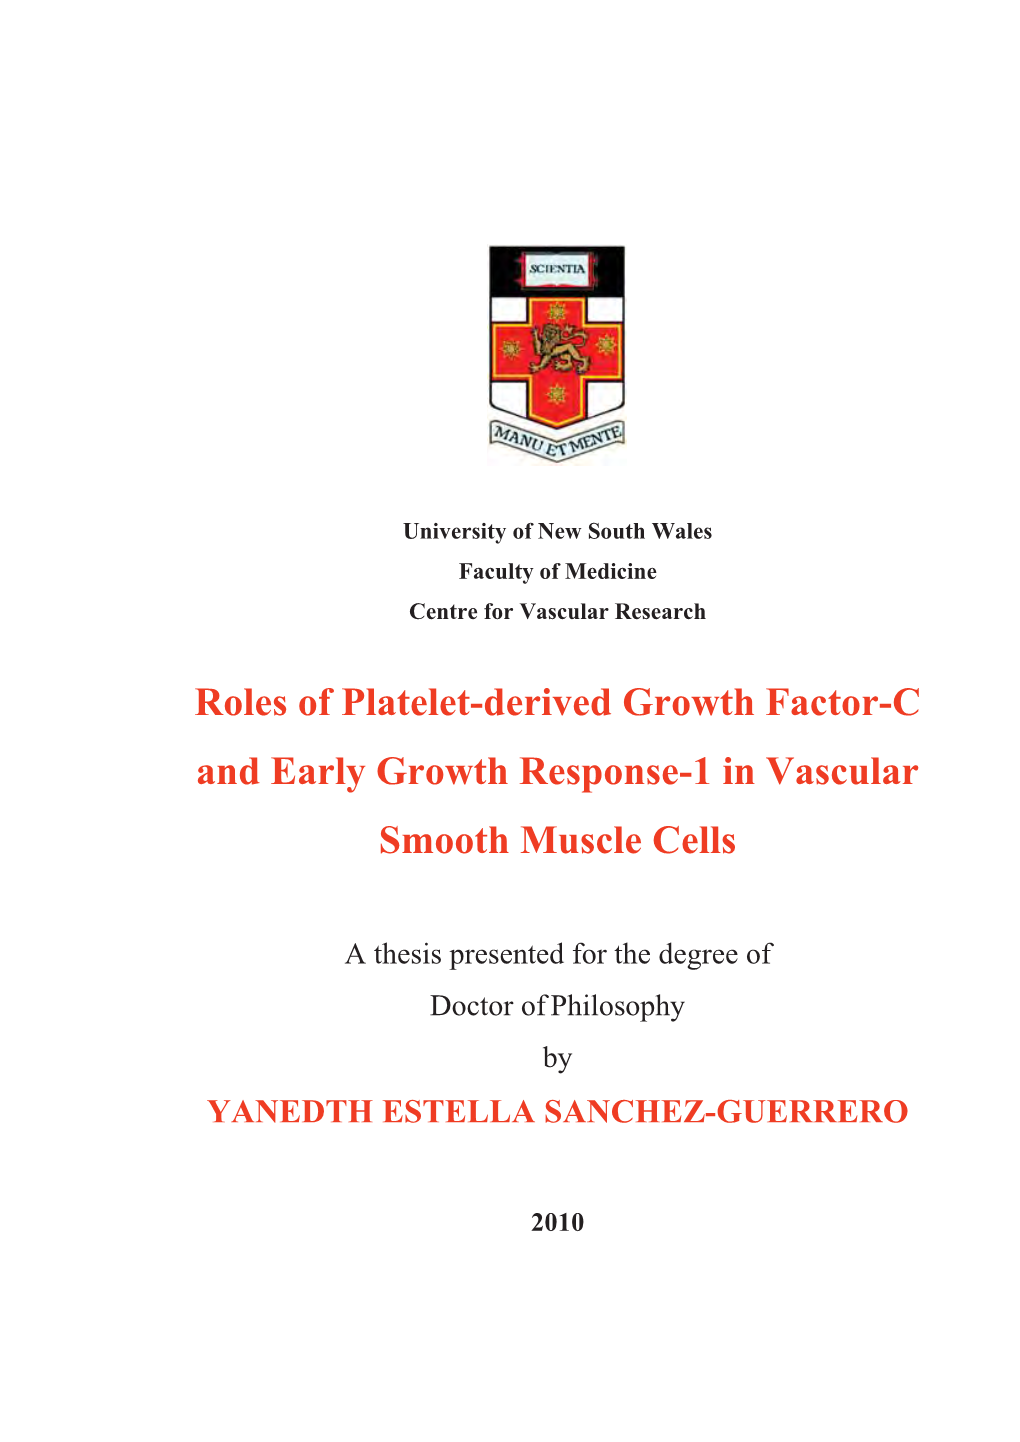 Roles of Platelet-Derived Growth Factor-C and Early Growth Response-1 in Vascular Smooth Muscle Cells